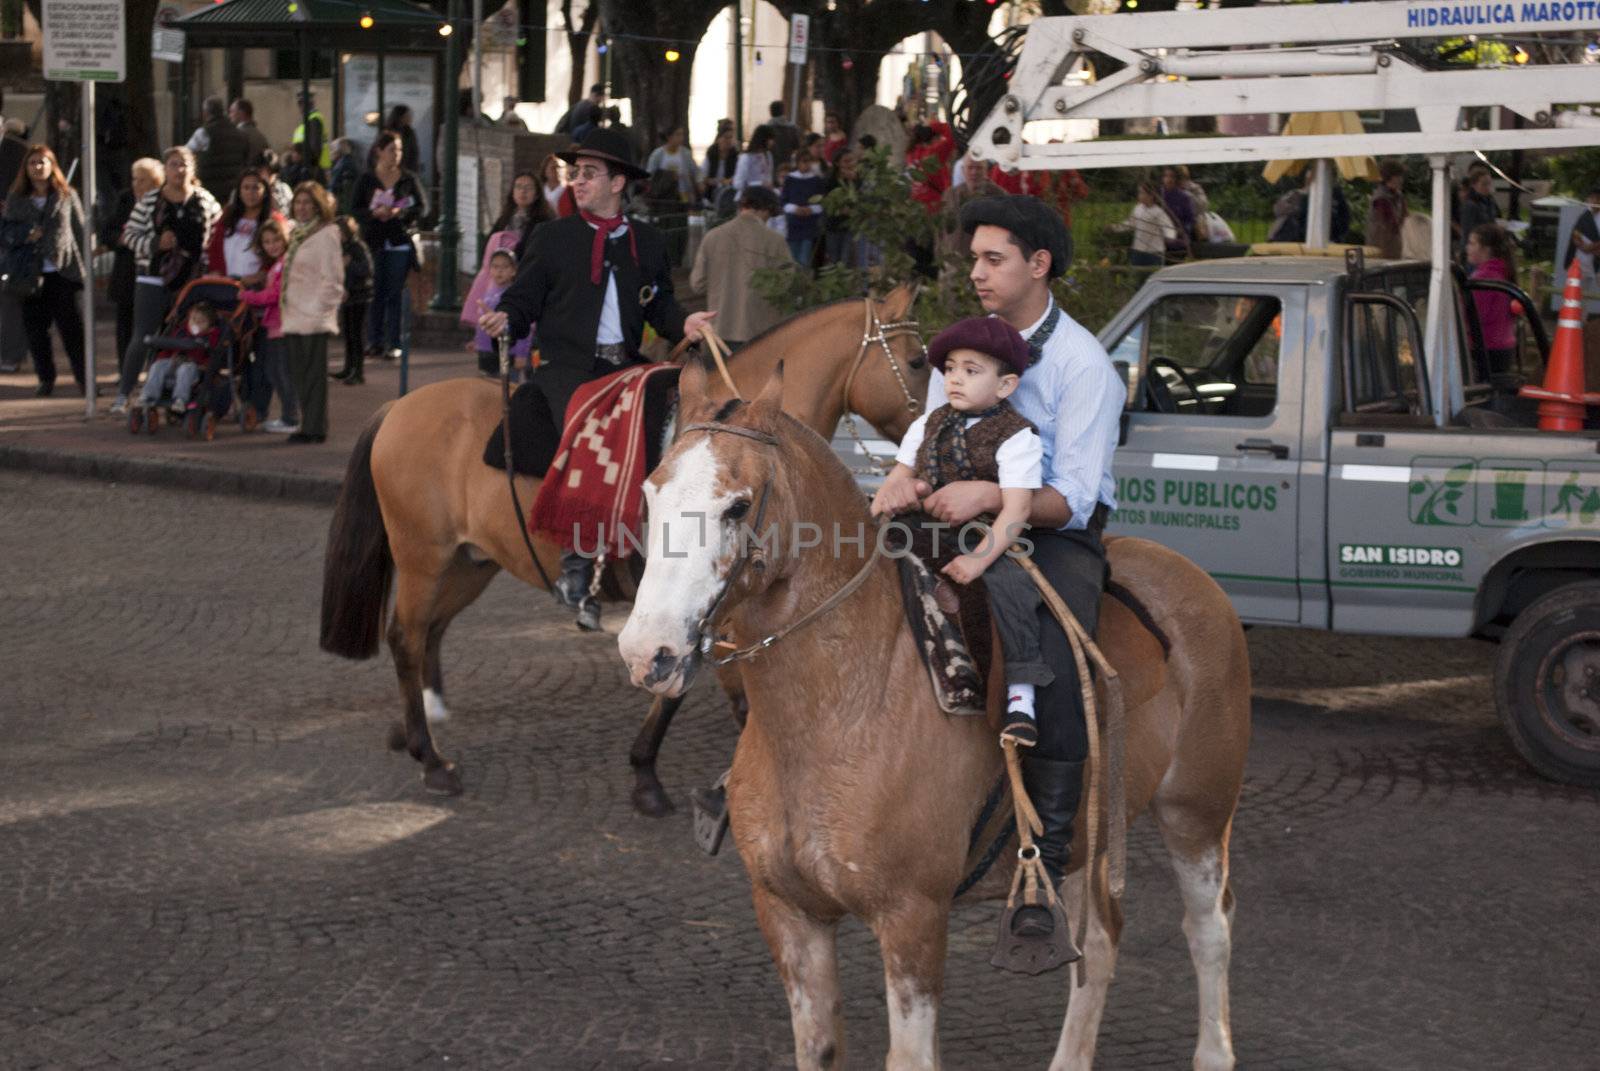 Argentine gauchos - 15 of May of 2012 by lauria